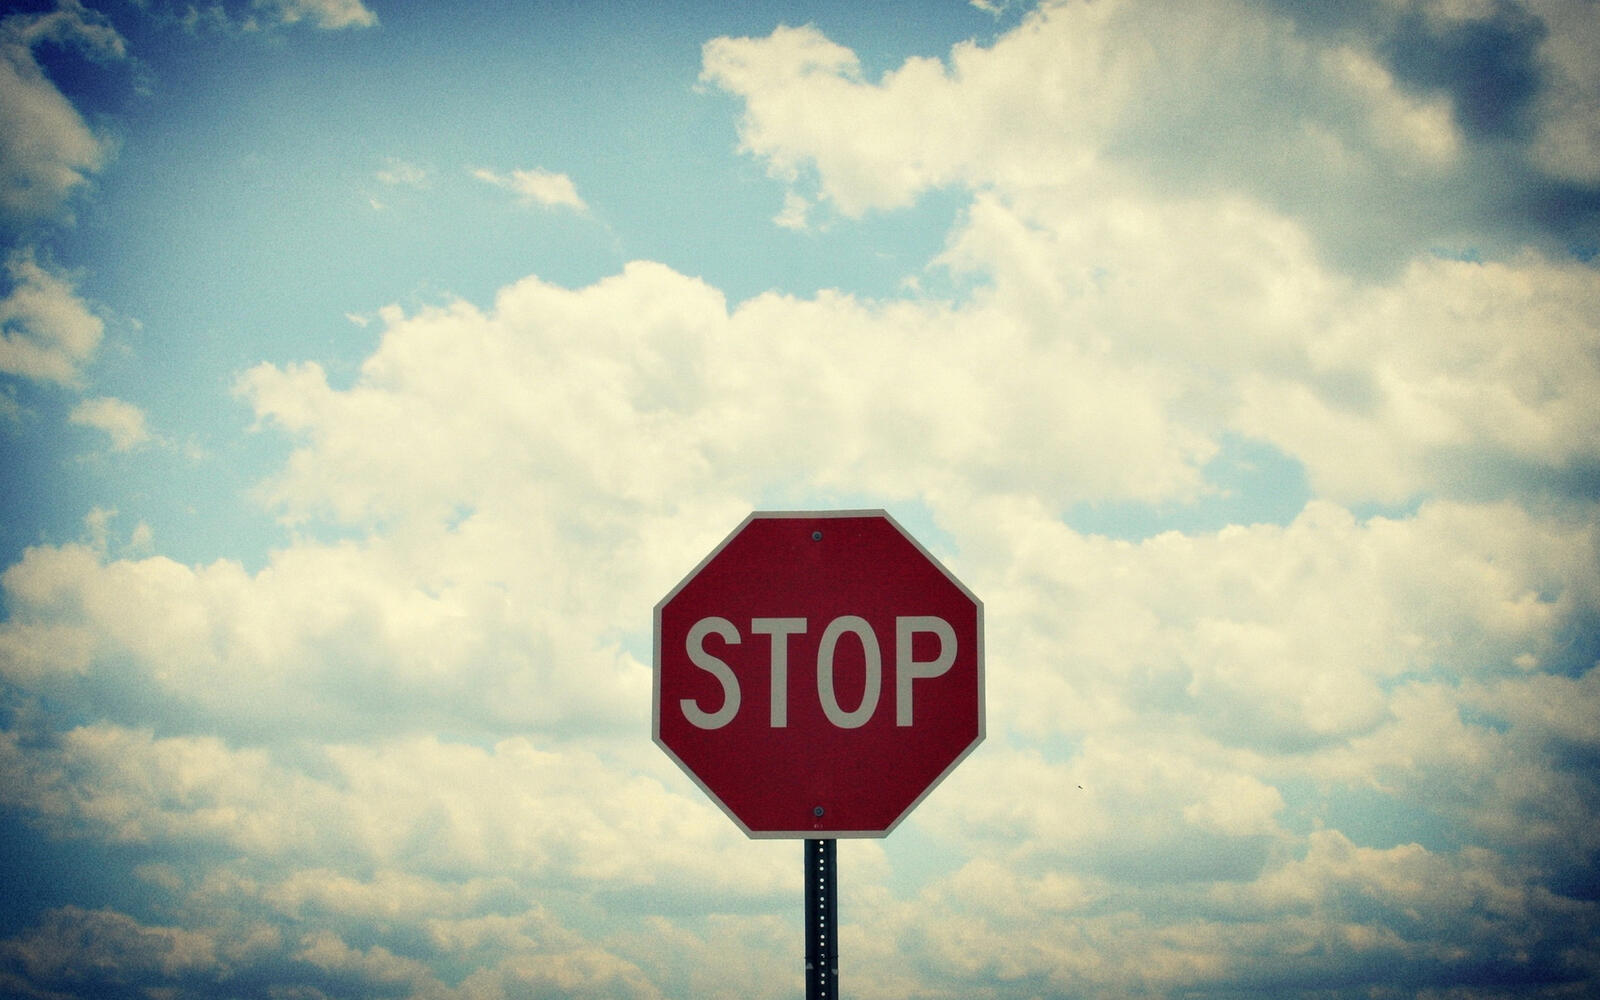 Wallpapers road sign stop on the desktop